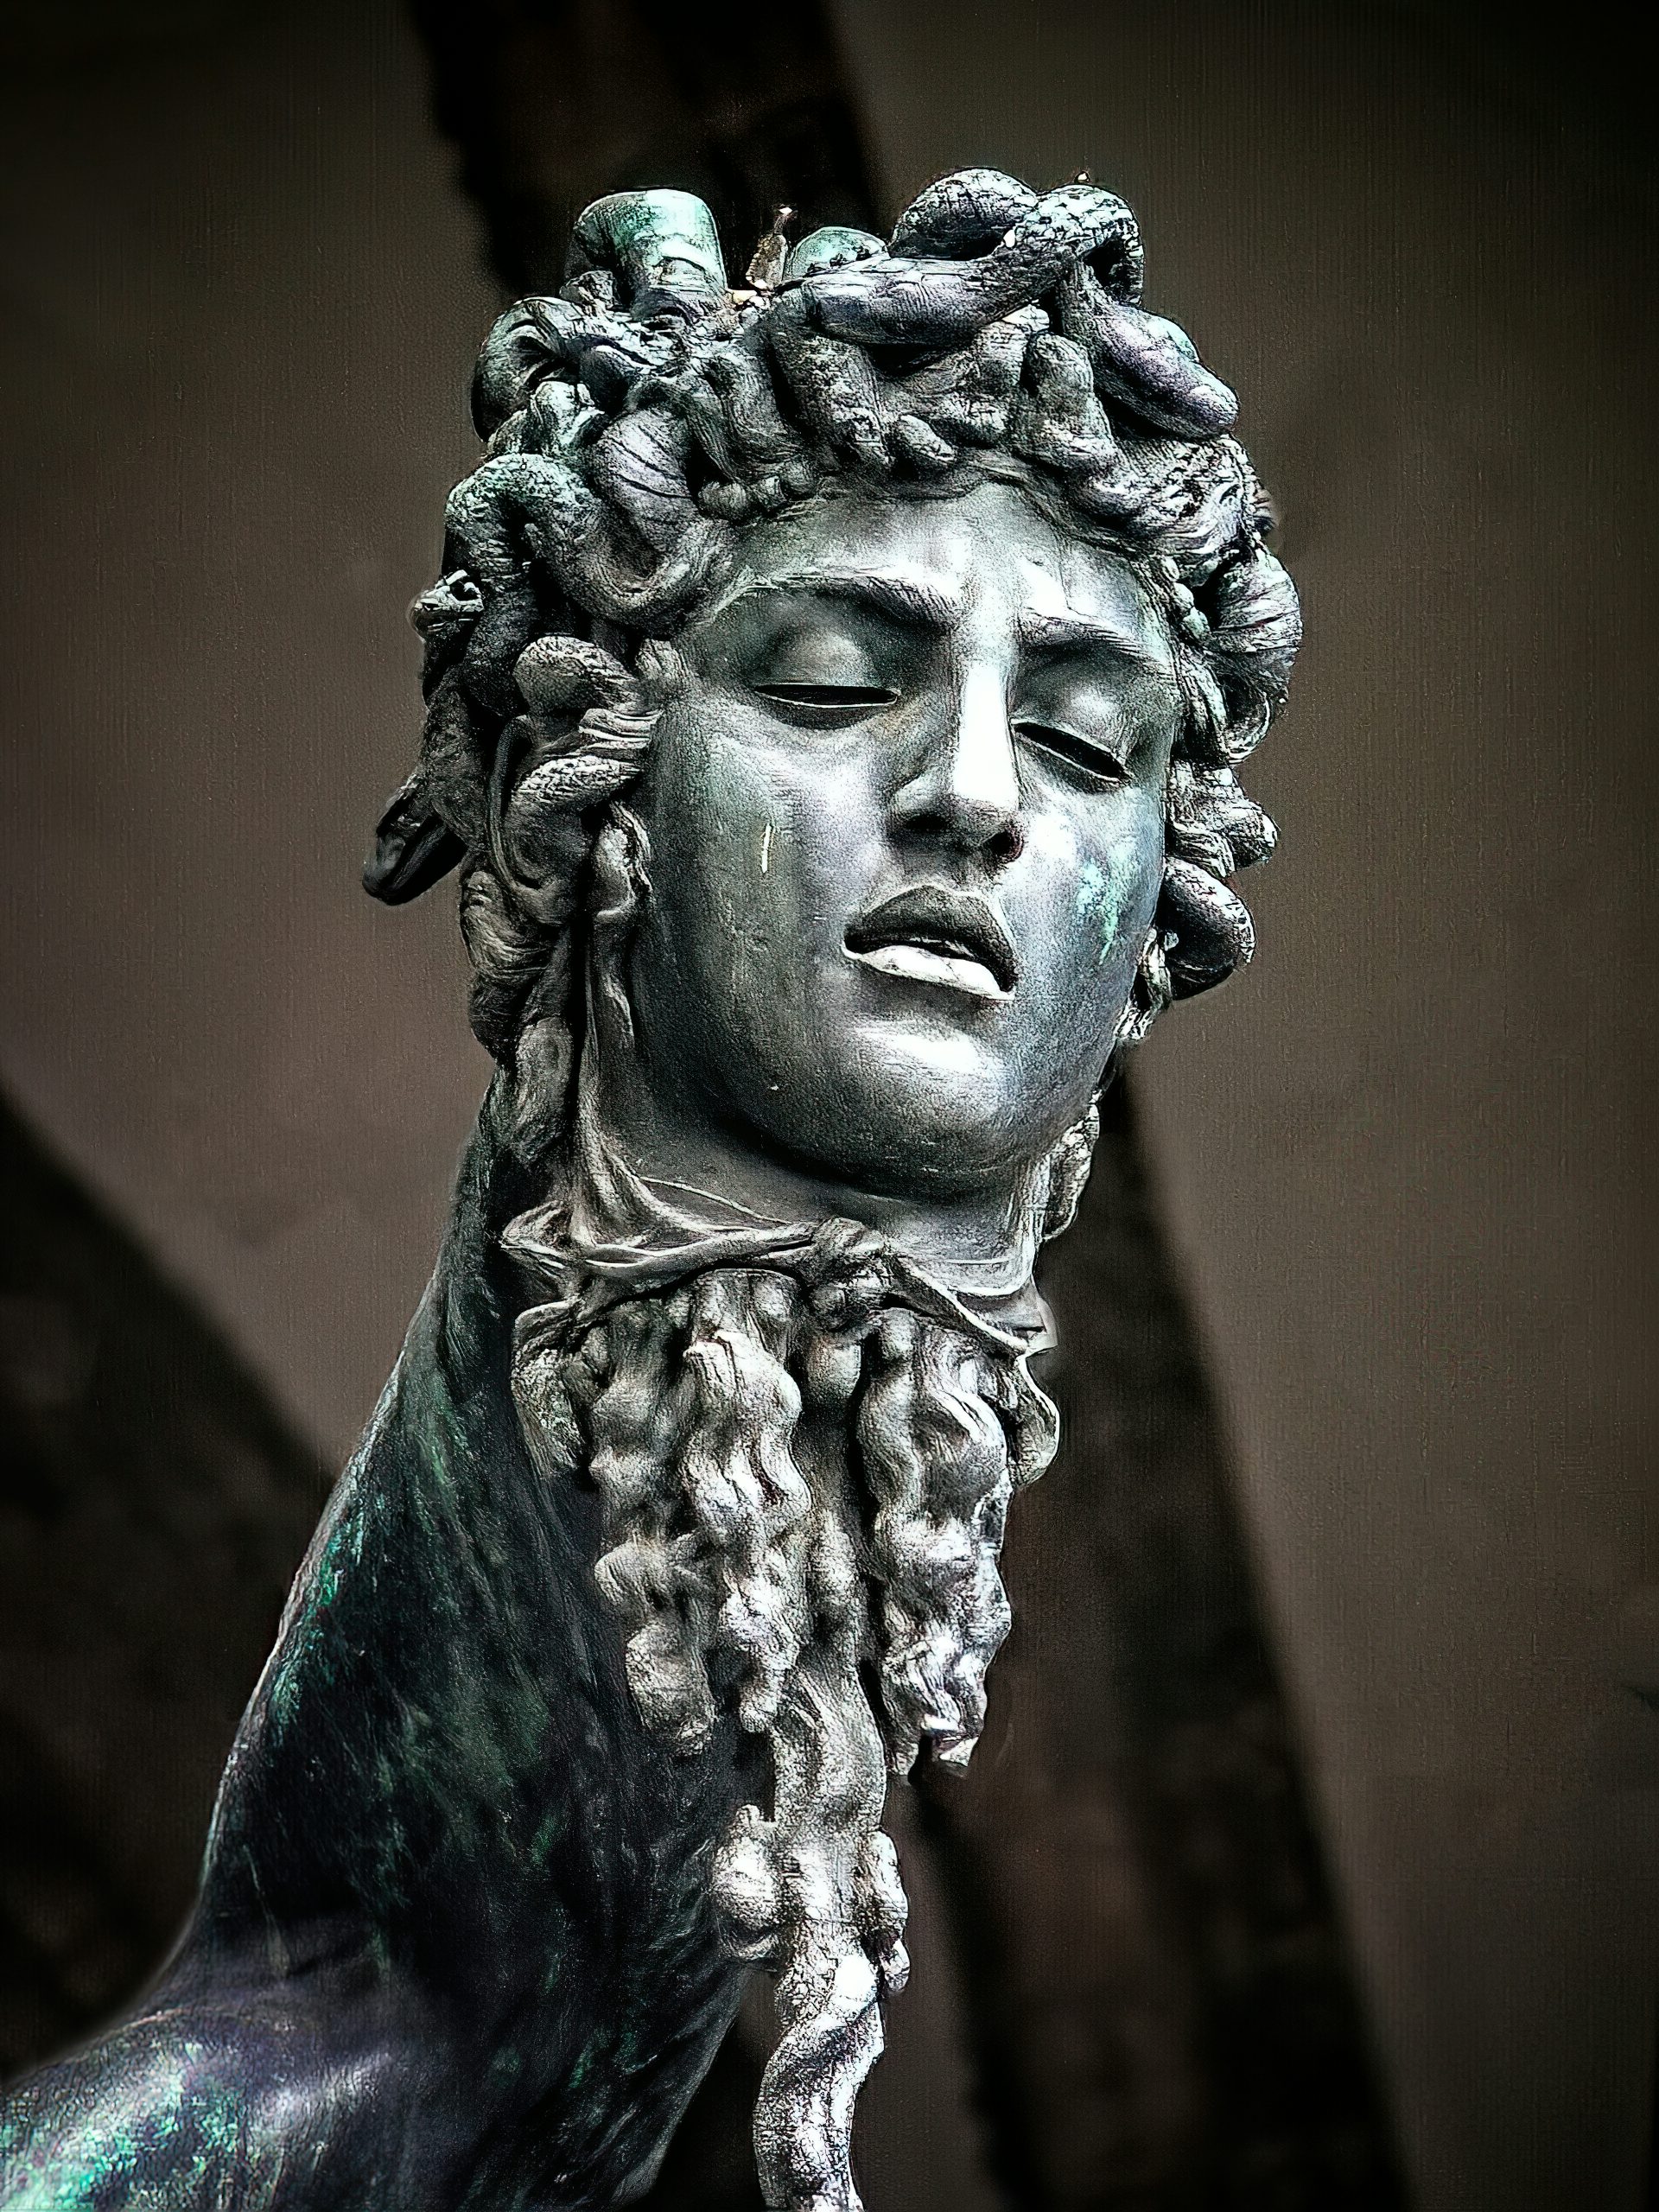 Medusa's decapitated head in Cellini's "Perseus with the Head of Medusa"